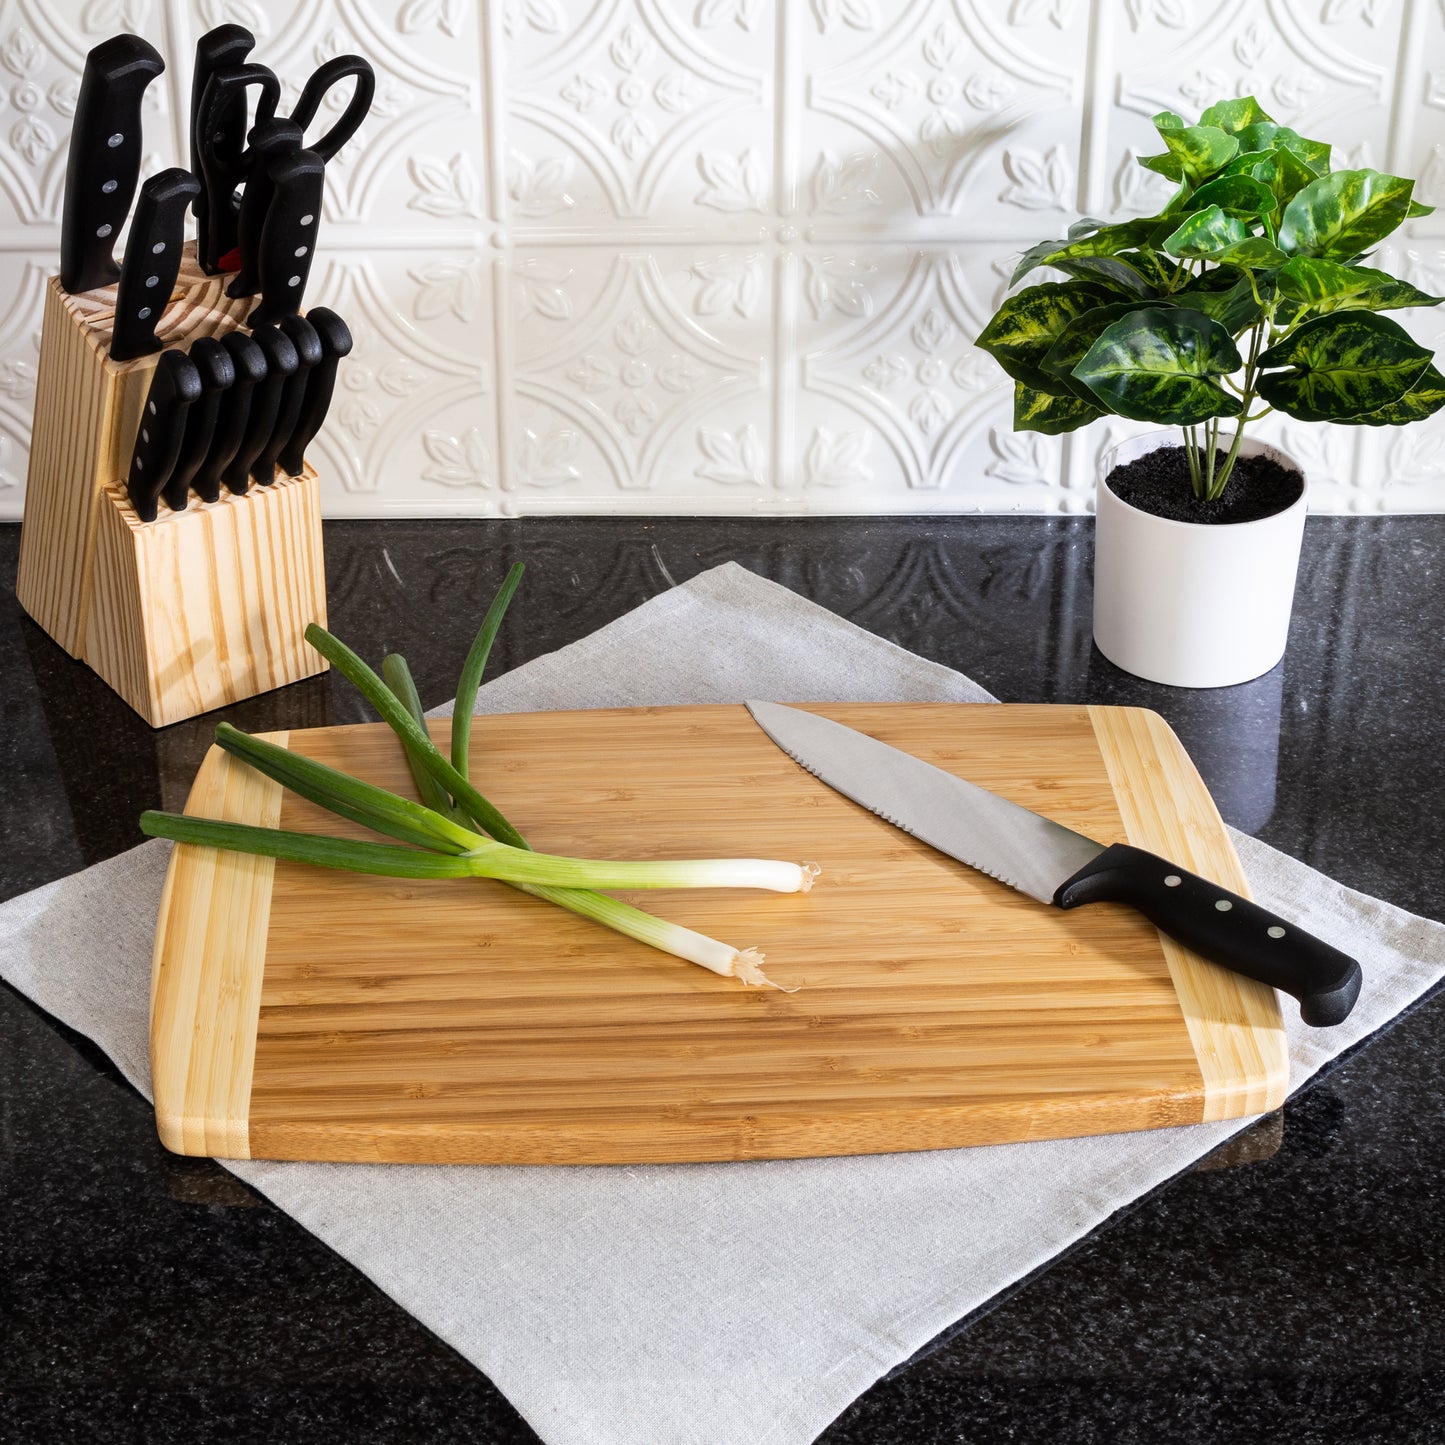 Extra Large Burnished Bamboo Cutting Board, 12x18-Inch